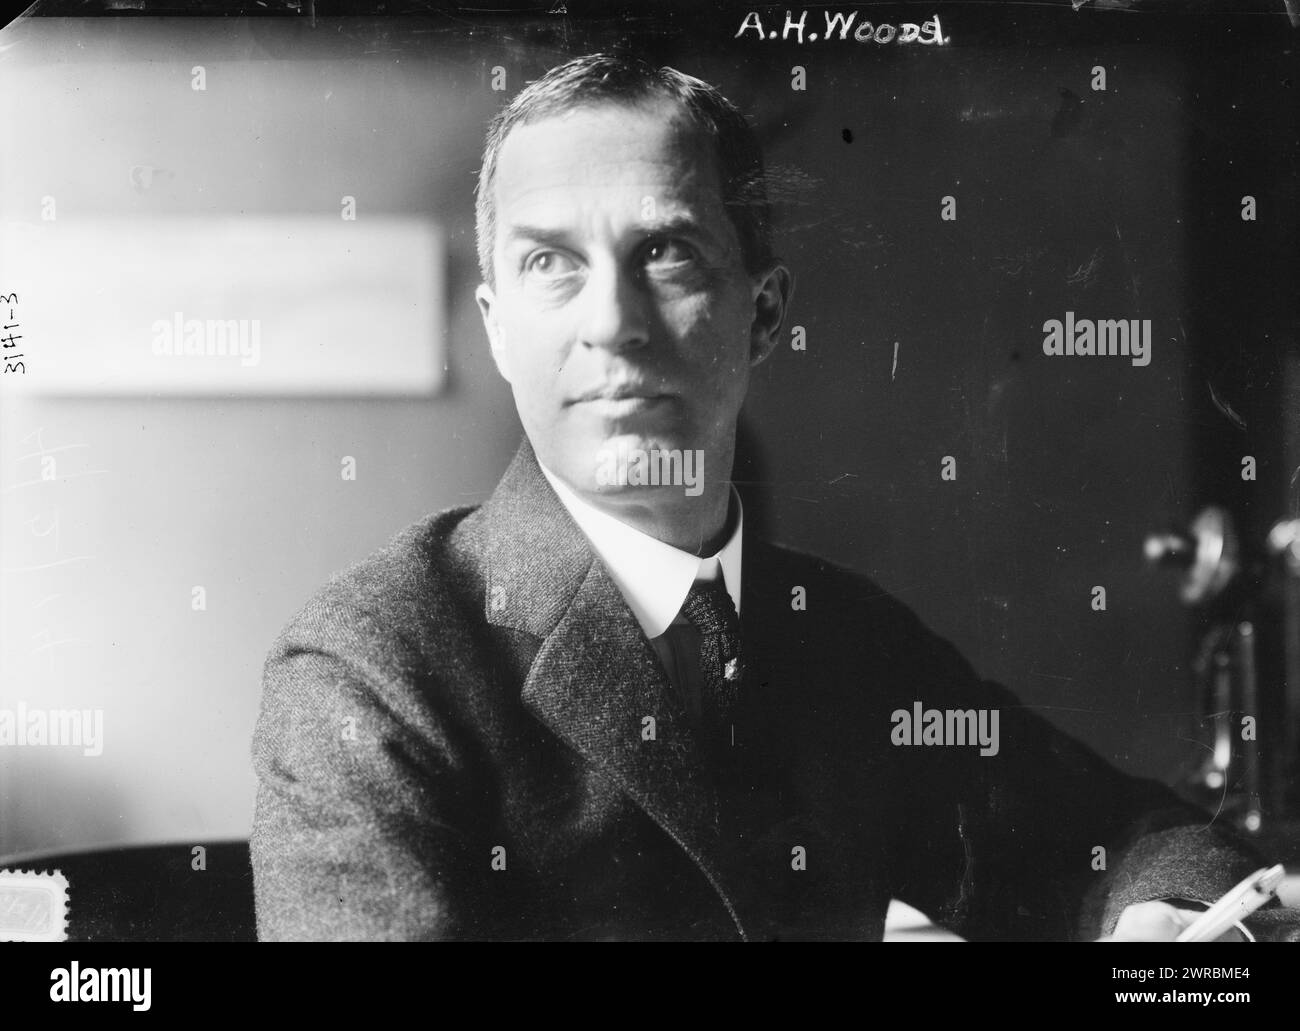 A.H. Woods, Photograph shows Colonel Arthur Hale Woods (1870-1942) an educator, journalist, military and law enforcement officer who became New York City Police Commissioner in 1914., 1914 April 2, Glass negatives, 1 negative: glass Stock Photo